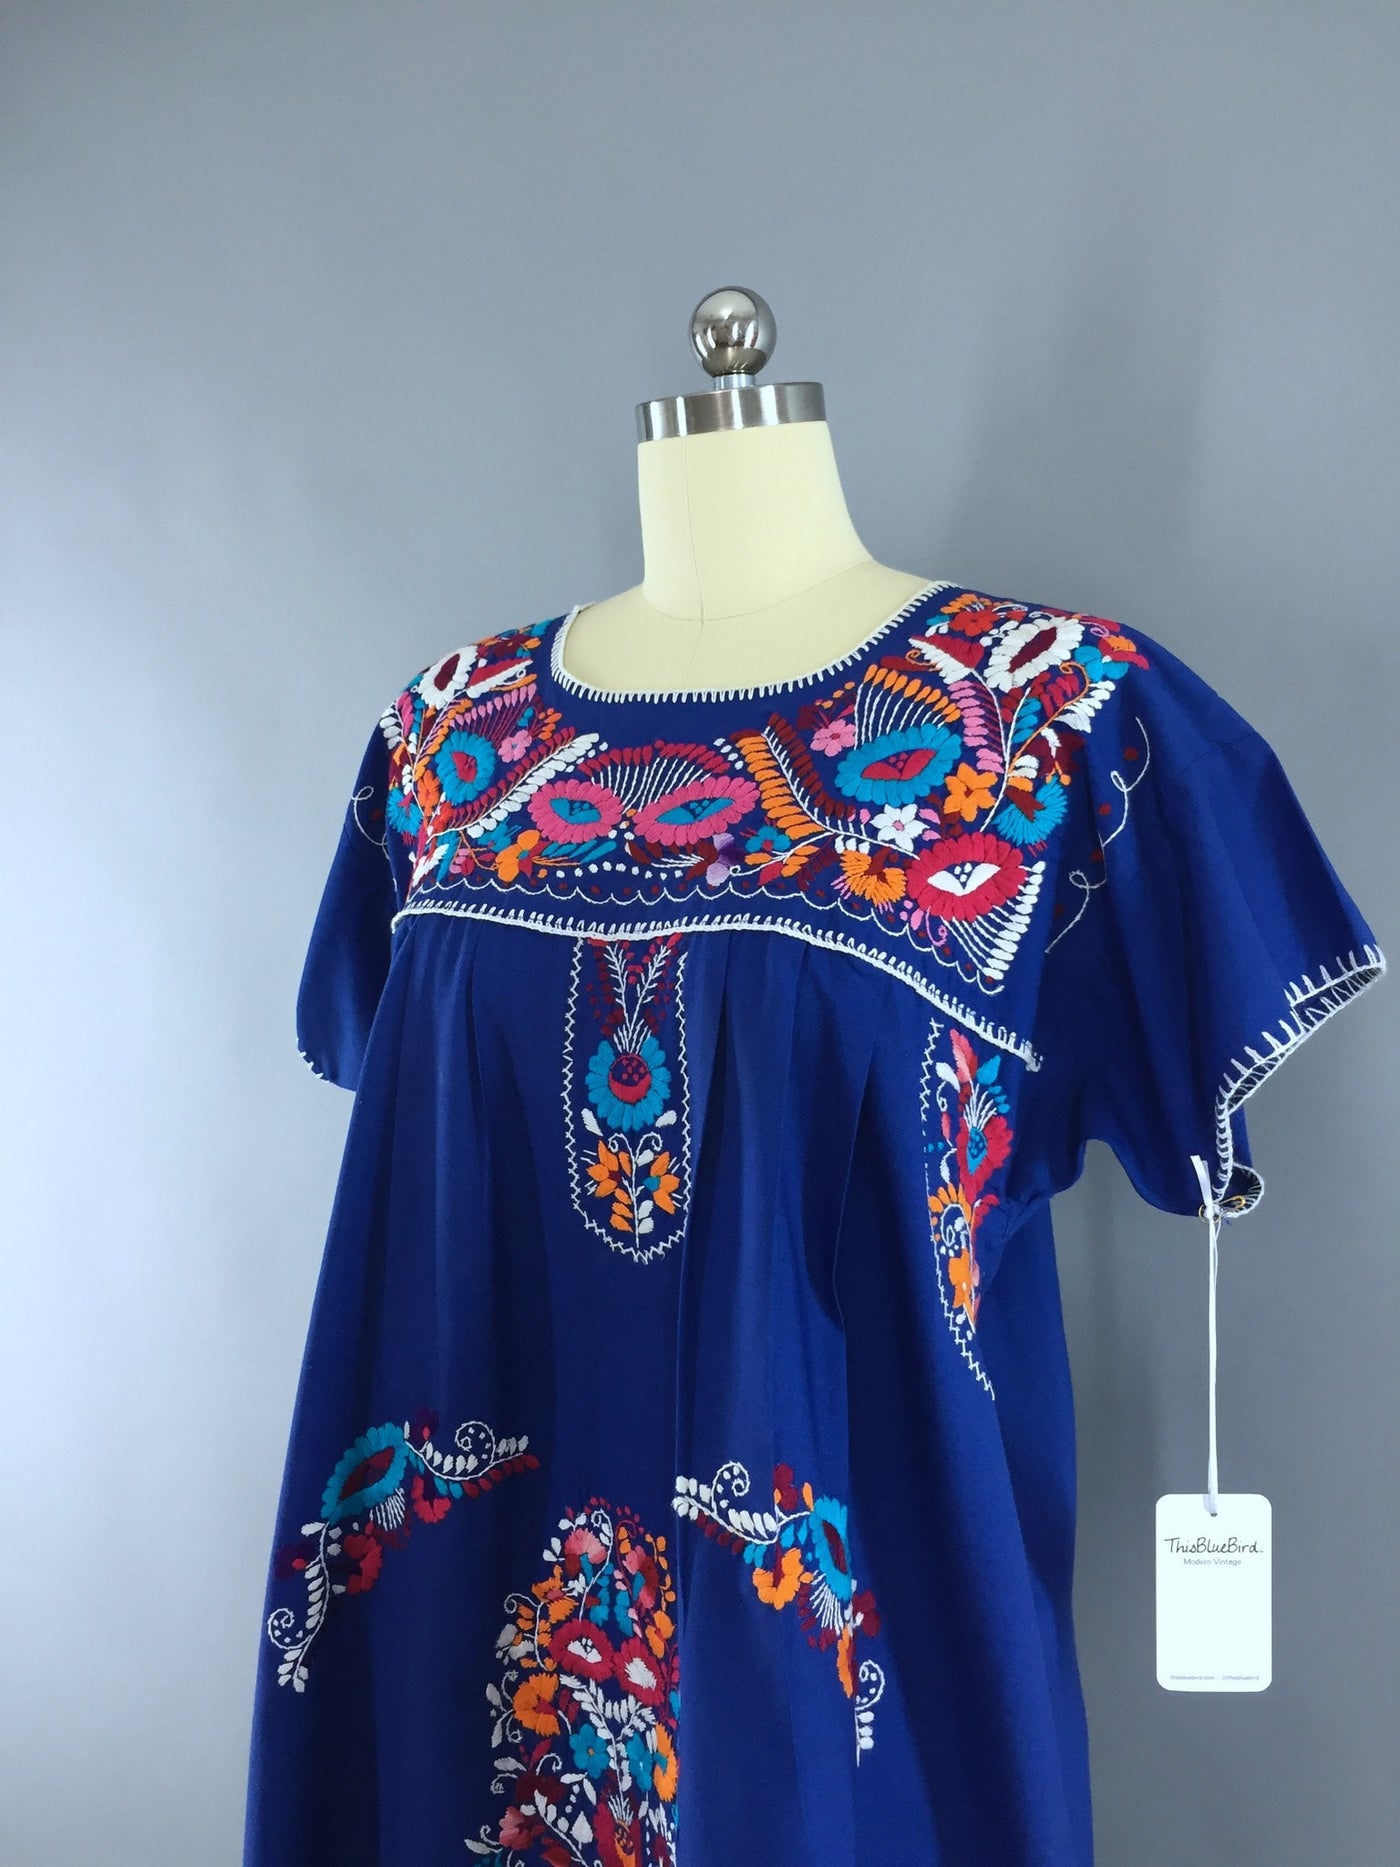 Vintage 1970s Mexican Dress / Oaxacan Embroidered Caftan / Royal Blue - ThisBlueBird